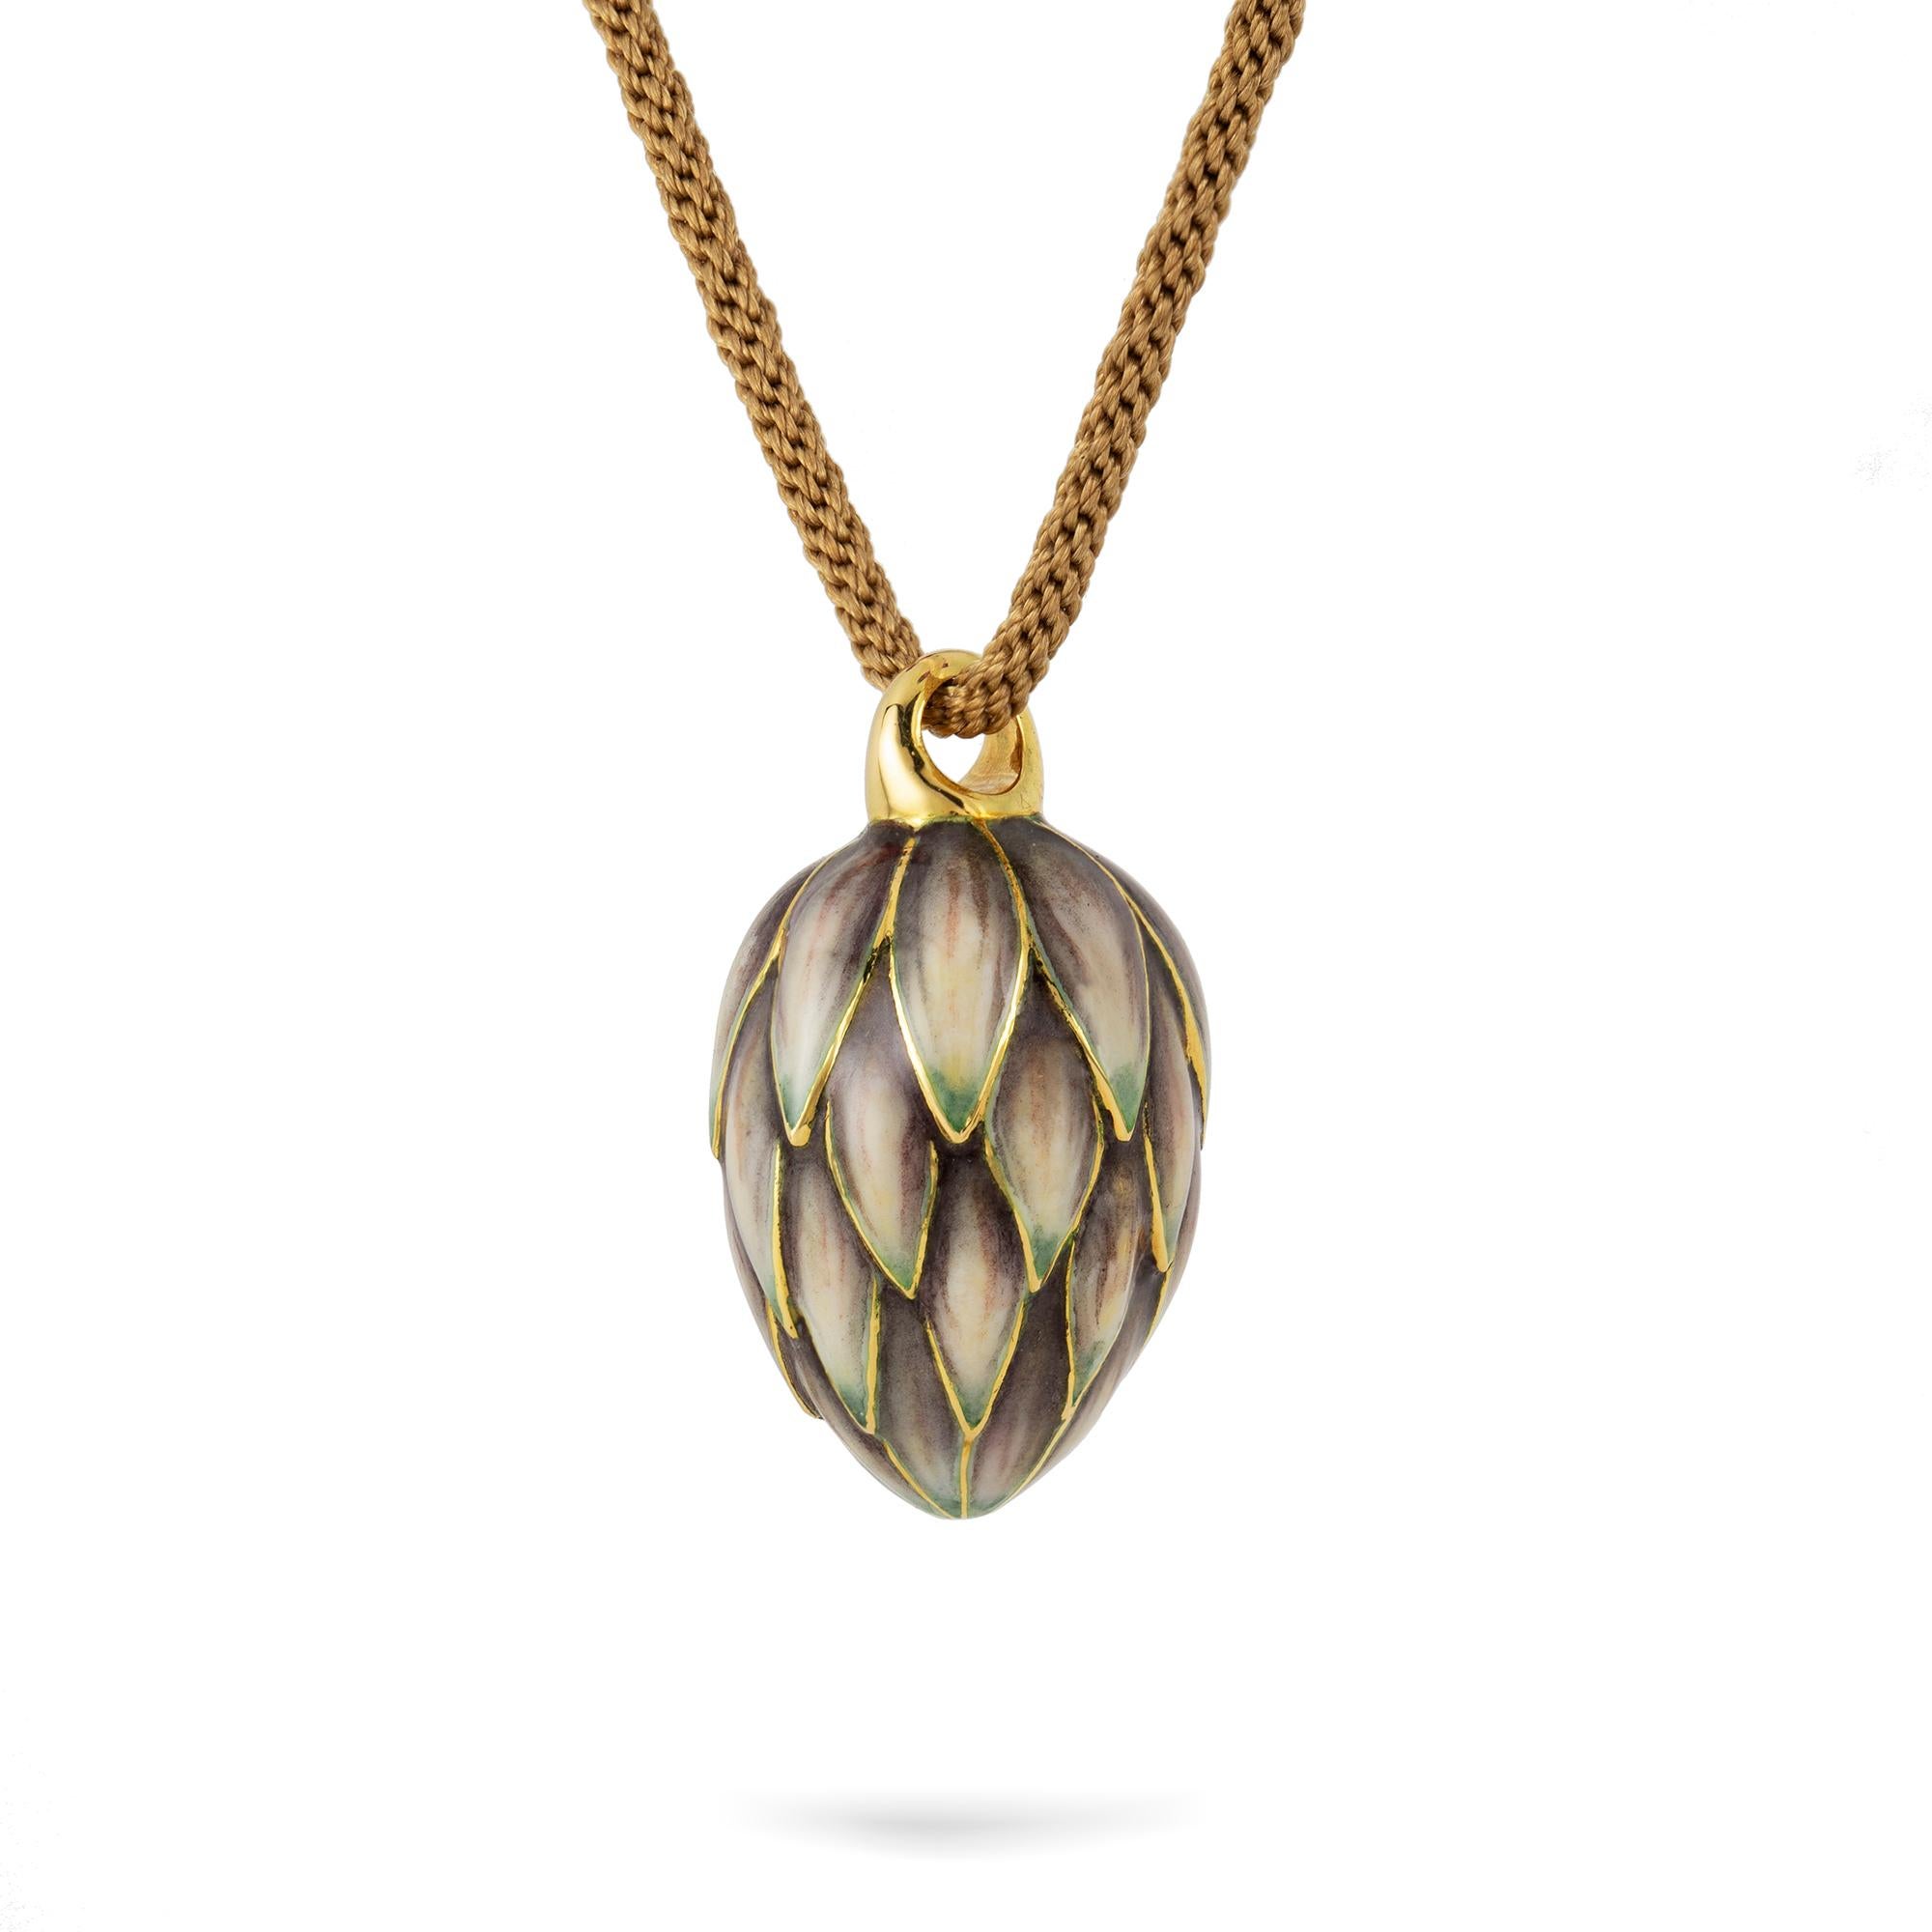 An Artichoke enamel pendant by Ilgiz F, the finely champlevé enamelled artichoke pendant made in 18ct yellow gold and suspended by a handwoven silk cord of brown colour, with yellow gold clasp, made by Ilgiz Fazulzyanov,  hallmarked 18ct gold,